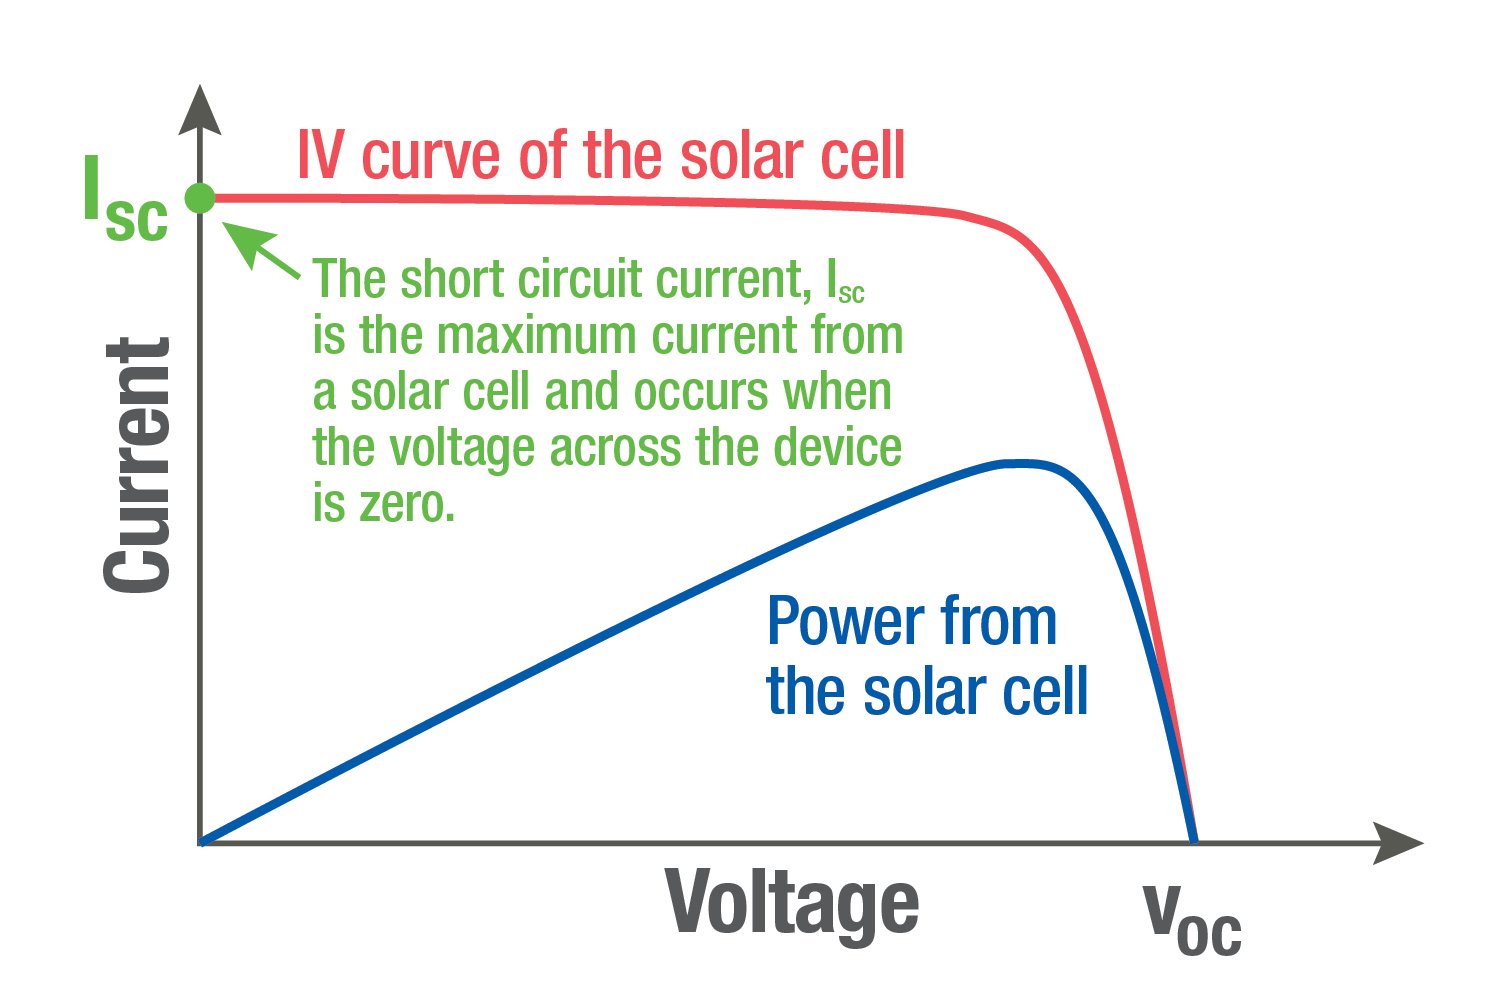 Graph comparing the IV curve of the solar cell with the power from the solar cell